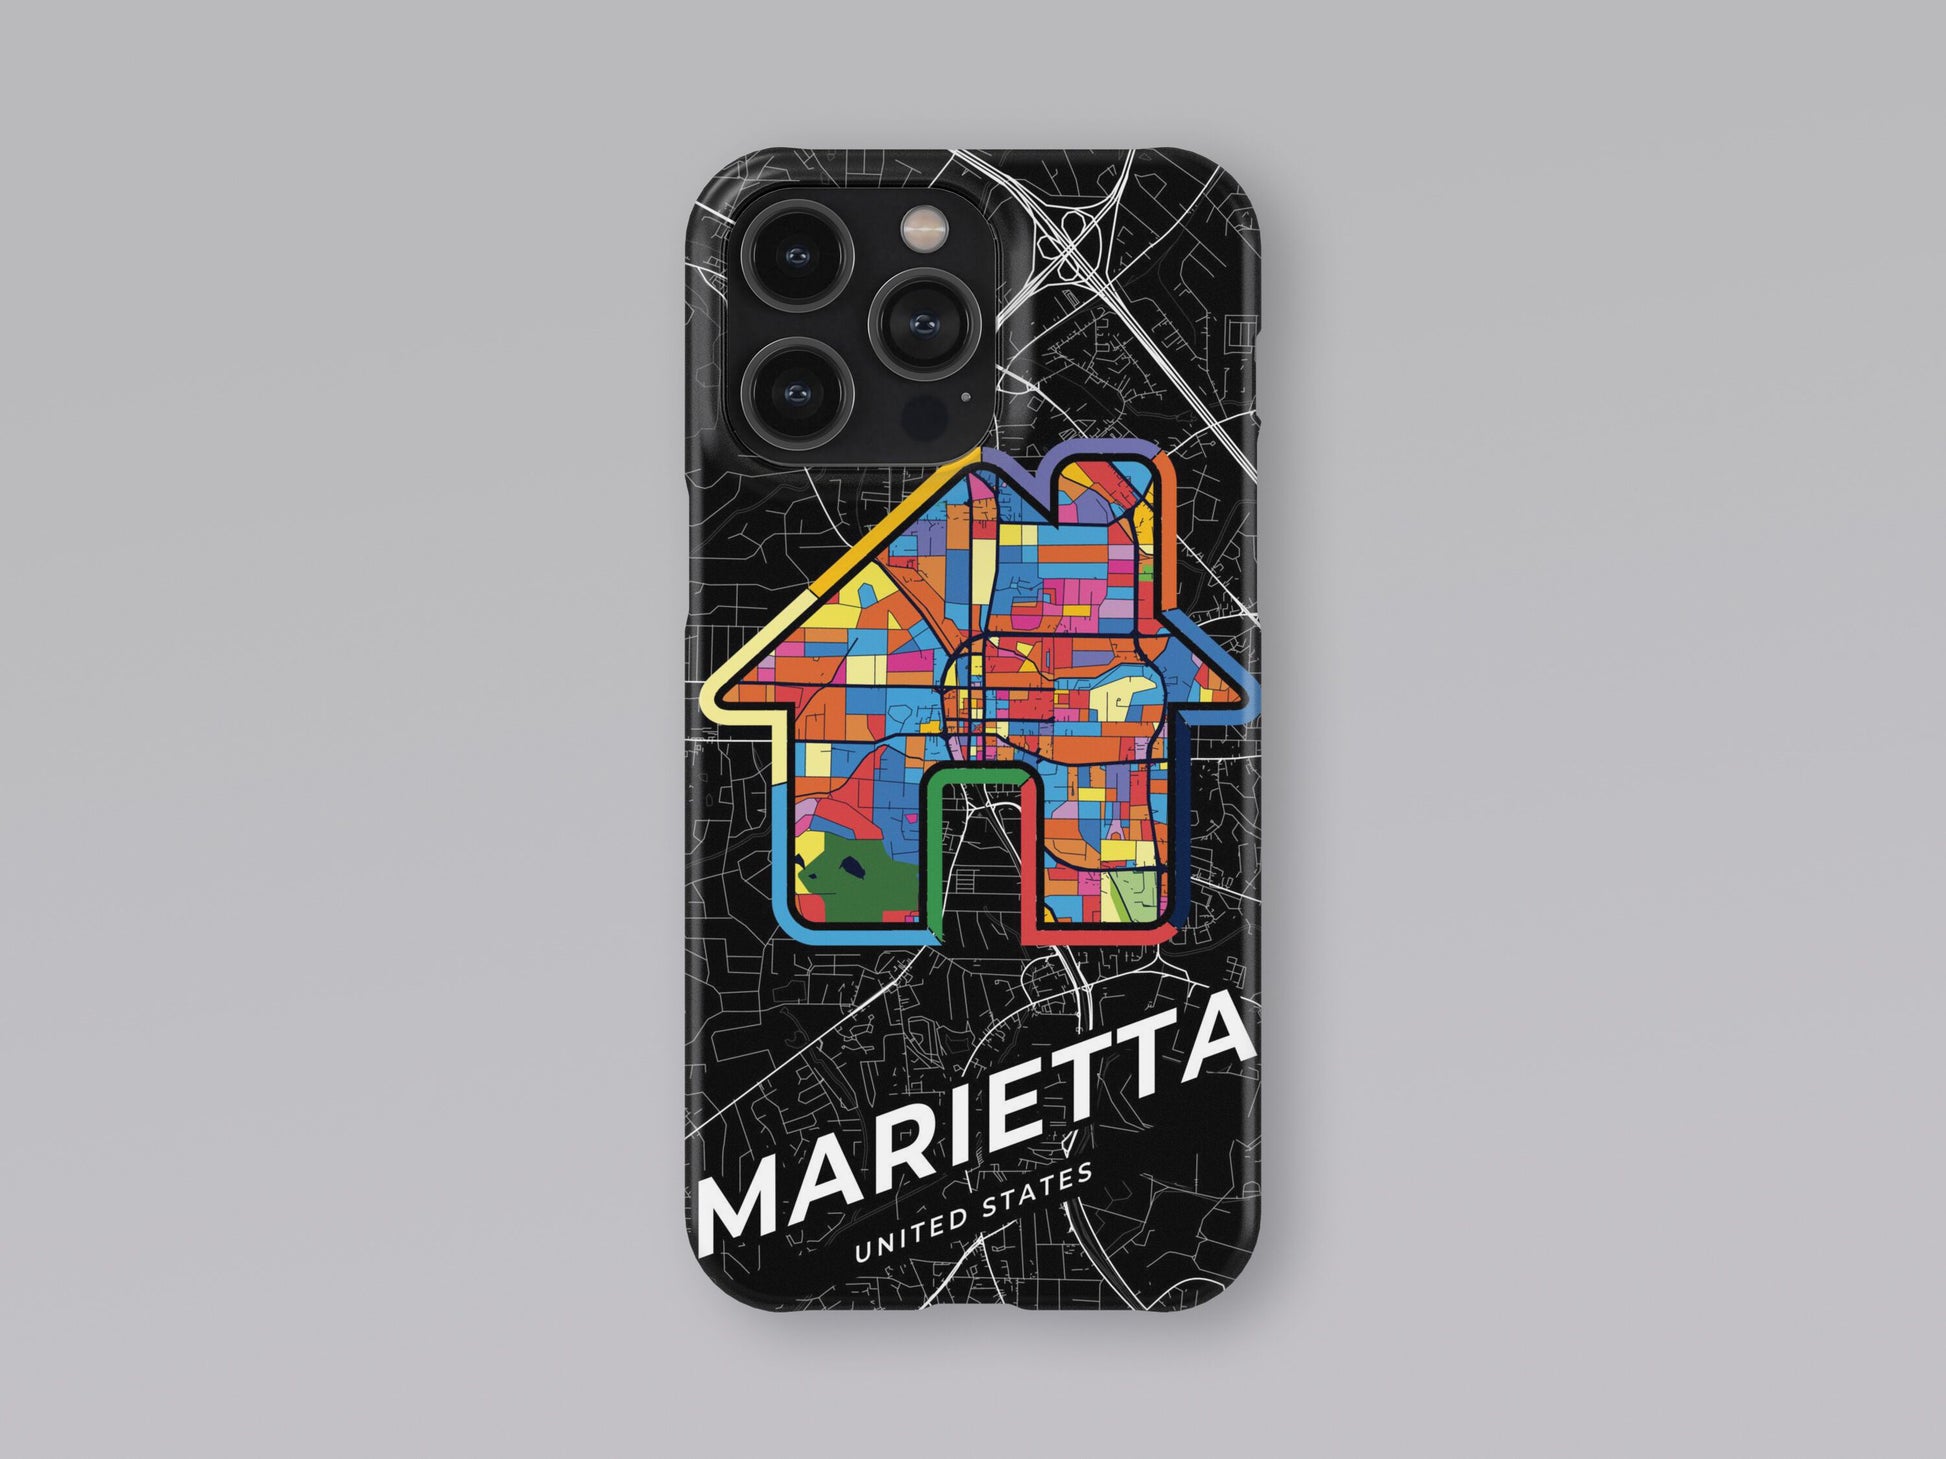 Marietta Georgia slim phone case with colorful icon. Birthday, wedding or housewarming gift. Couple match cases. 3